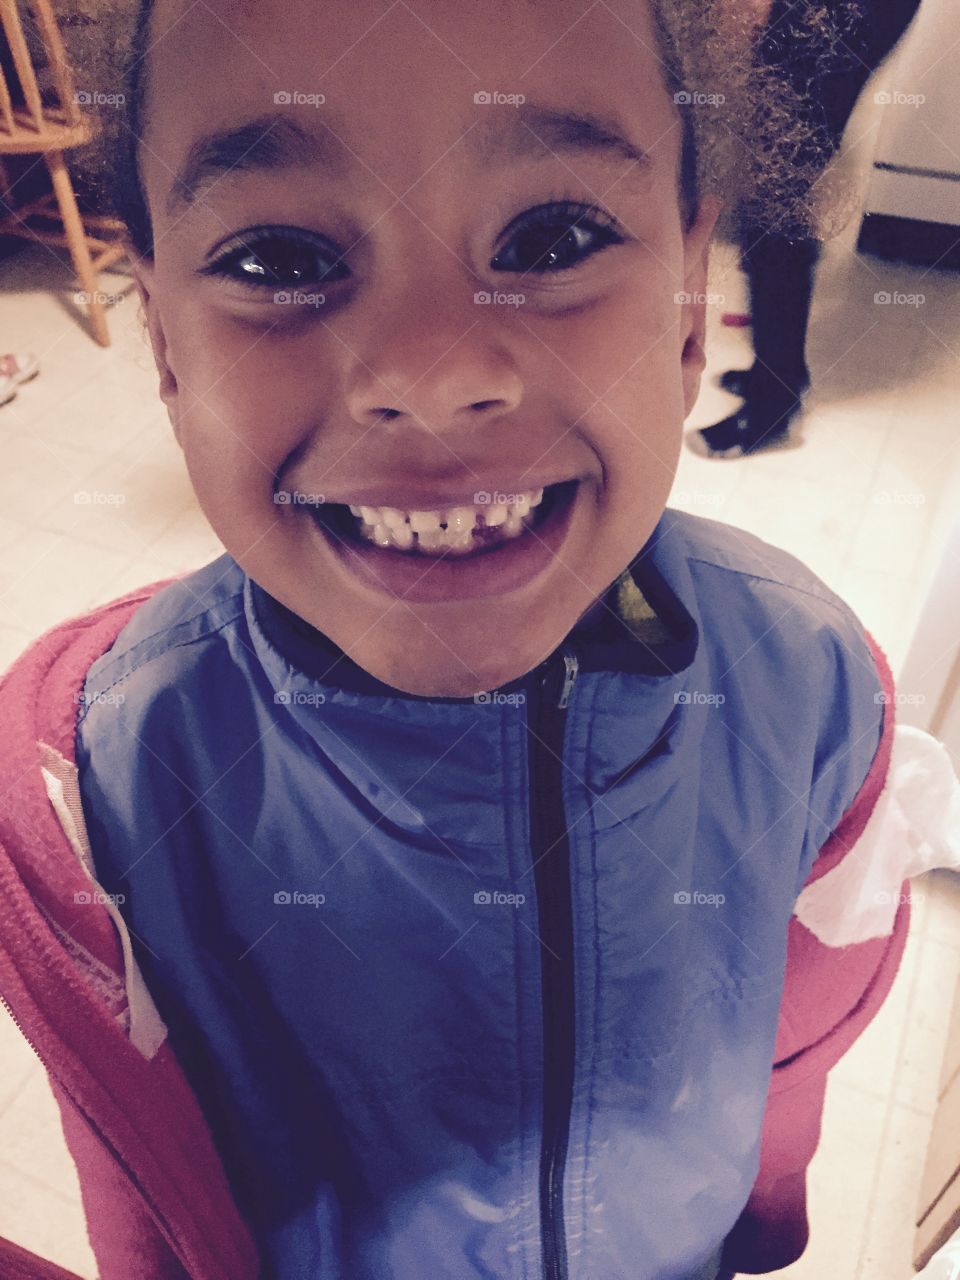 Lost my first tooth